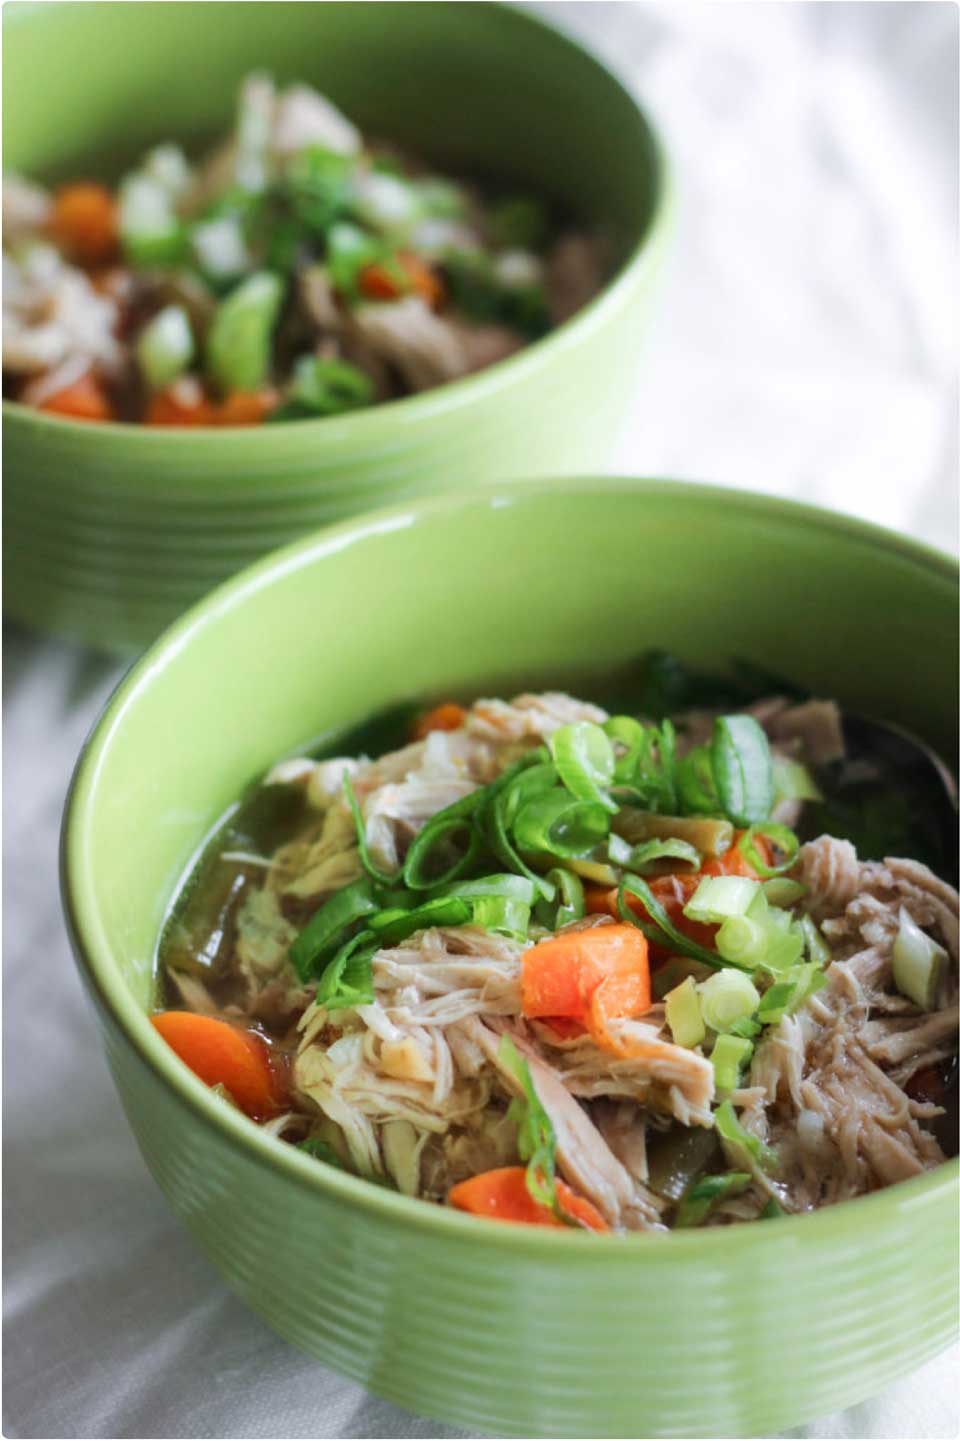 A classic soup recipe made so quick and easy in your pressure cooker - Instant Pot Chicken Soup from Jean at What Great Grandma Ate. For more classic (and not-so-classic) recipes ideas, be sure to peek at our whole list of Instant Pot soups!